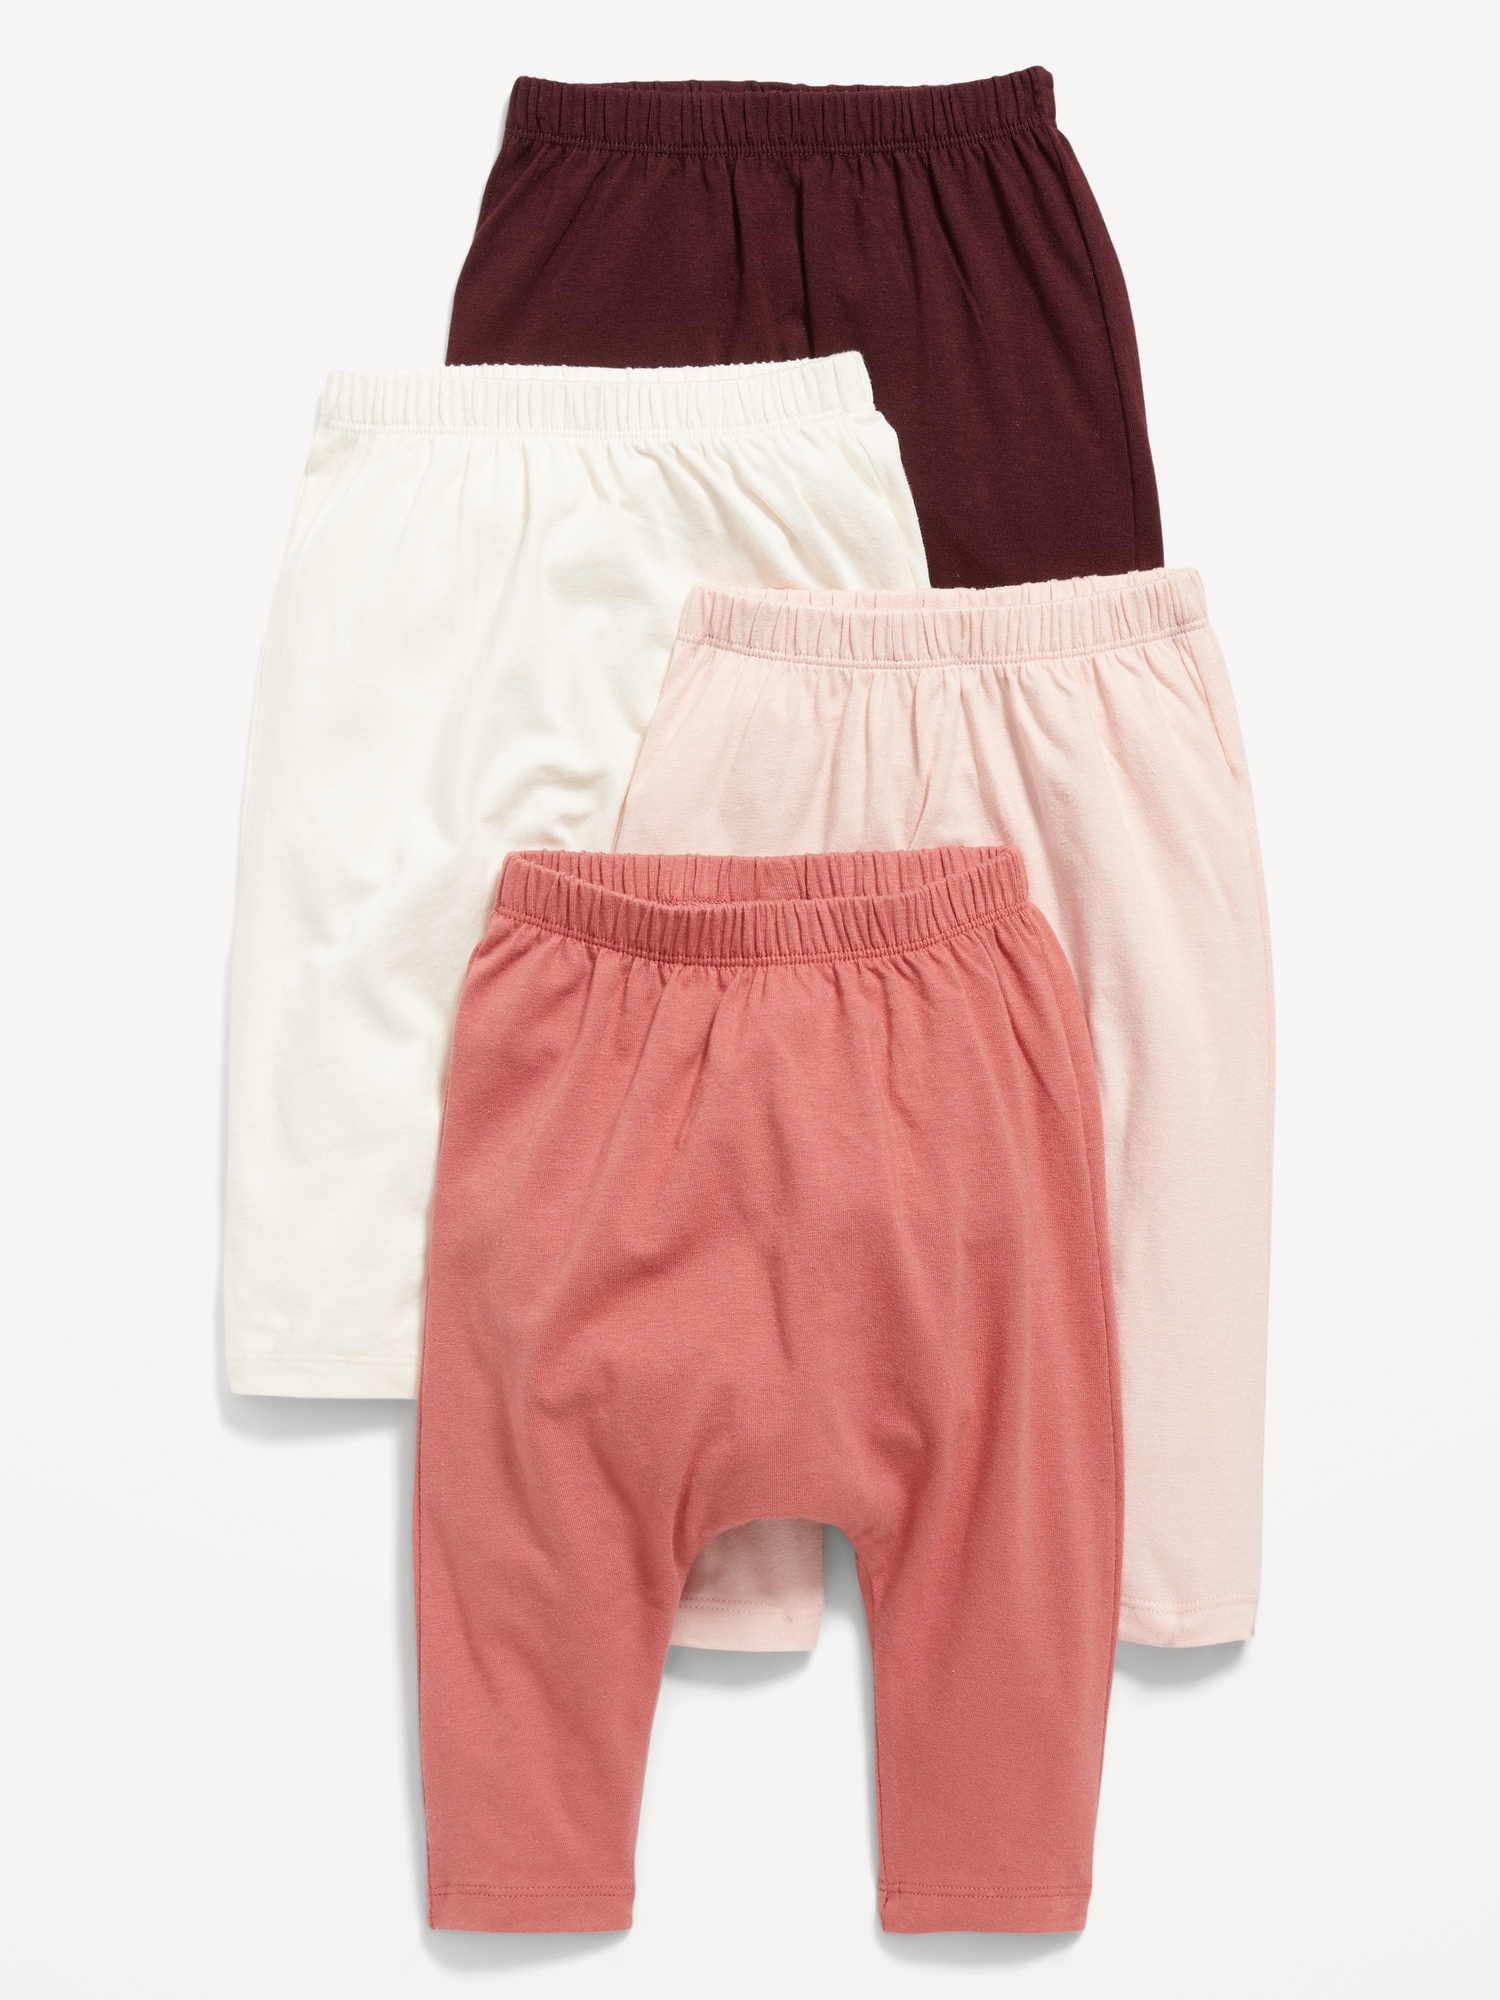 Unisex Knit Pants 4-Pack for Baby